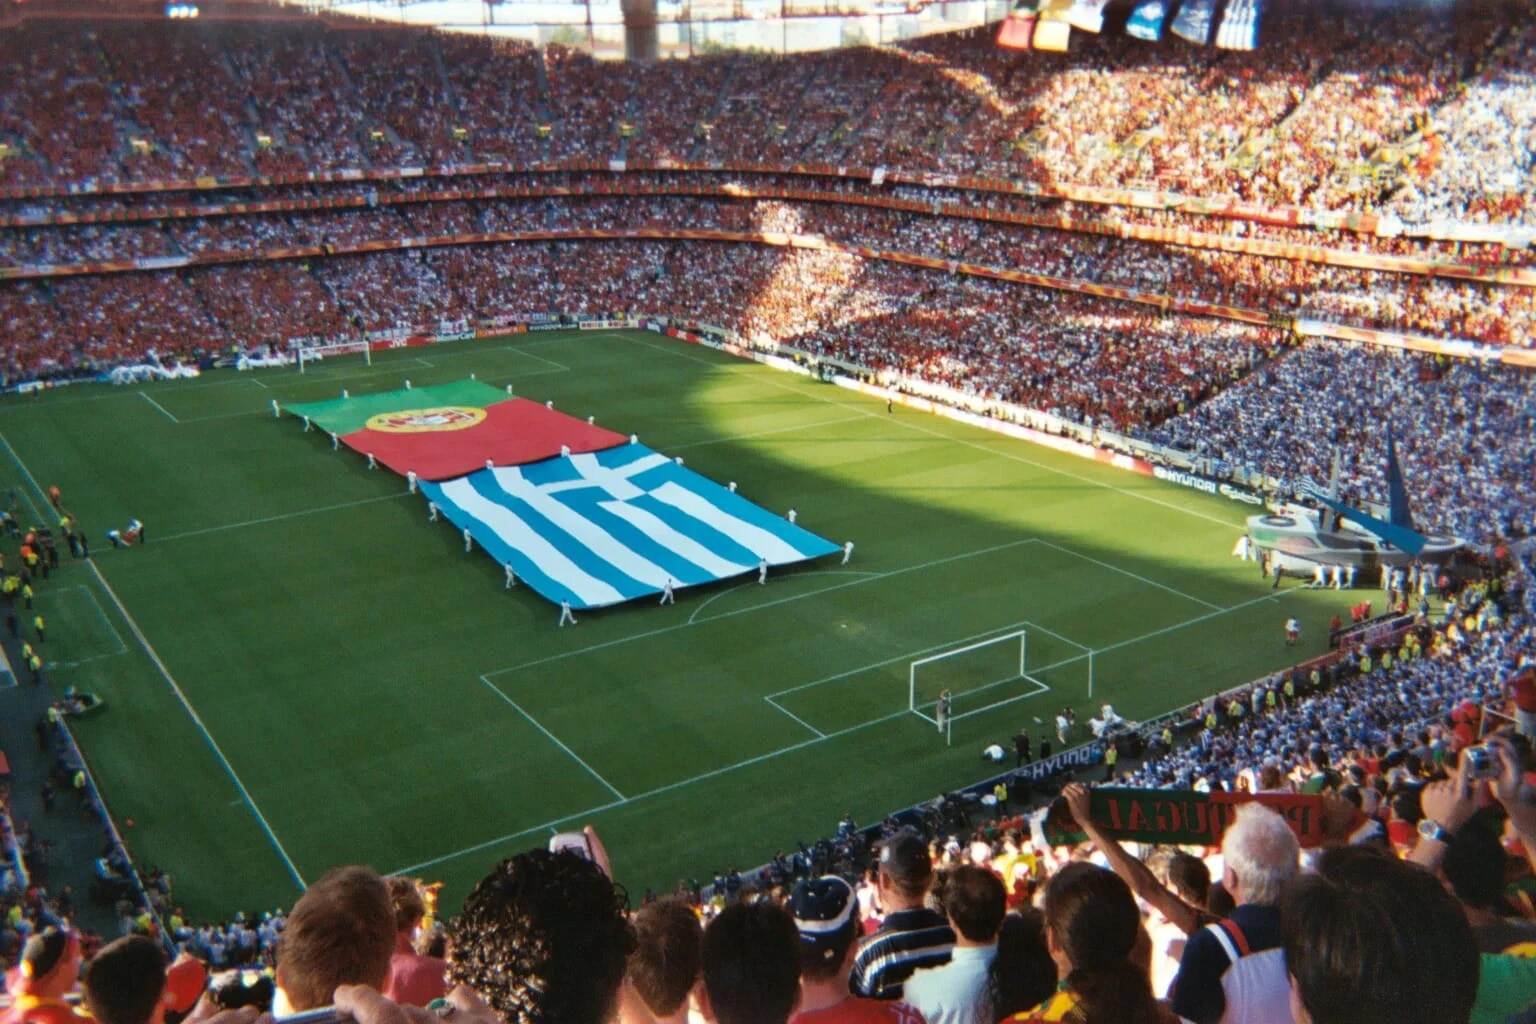 The Greek miracle at Euro 2004 | An imperfect story of identity